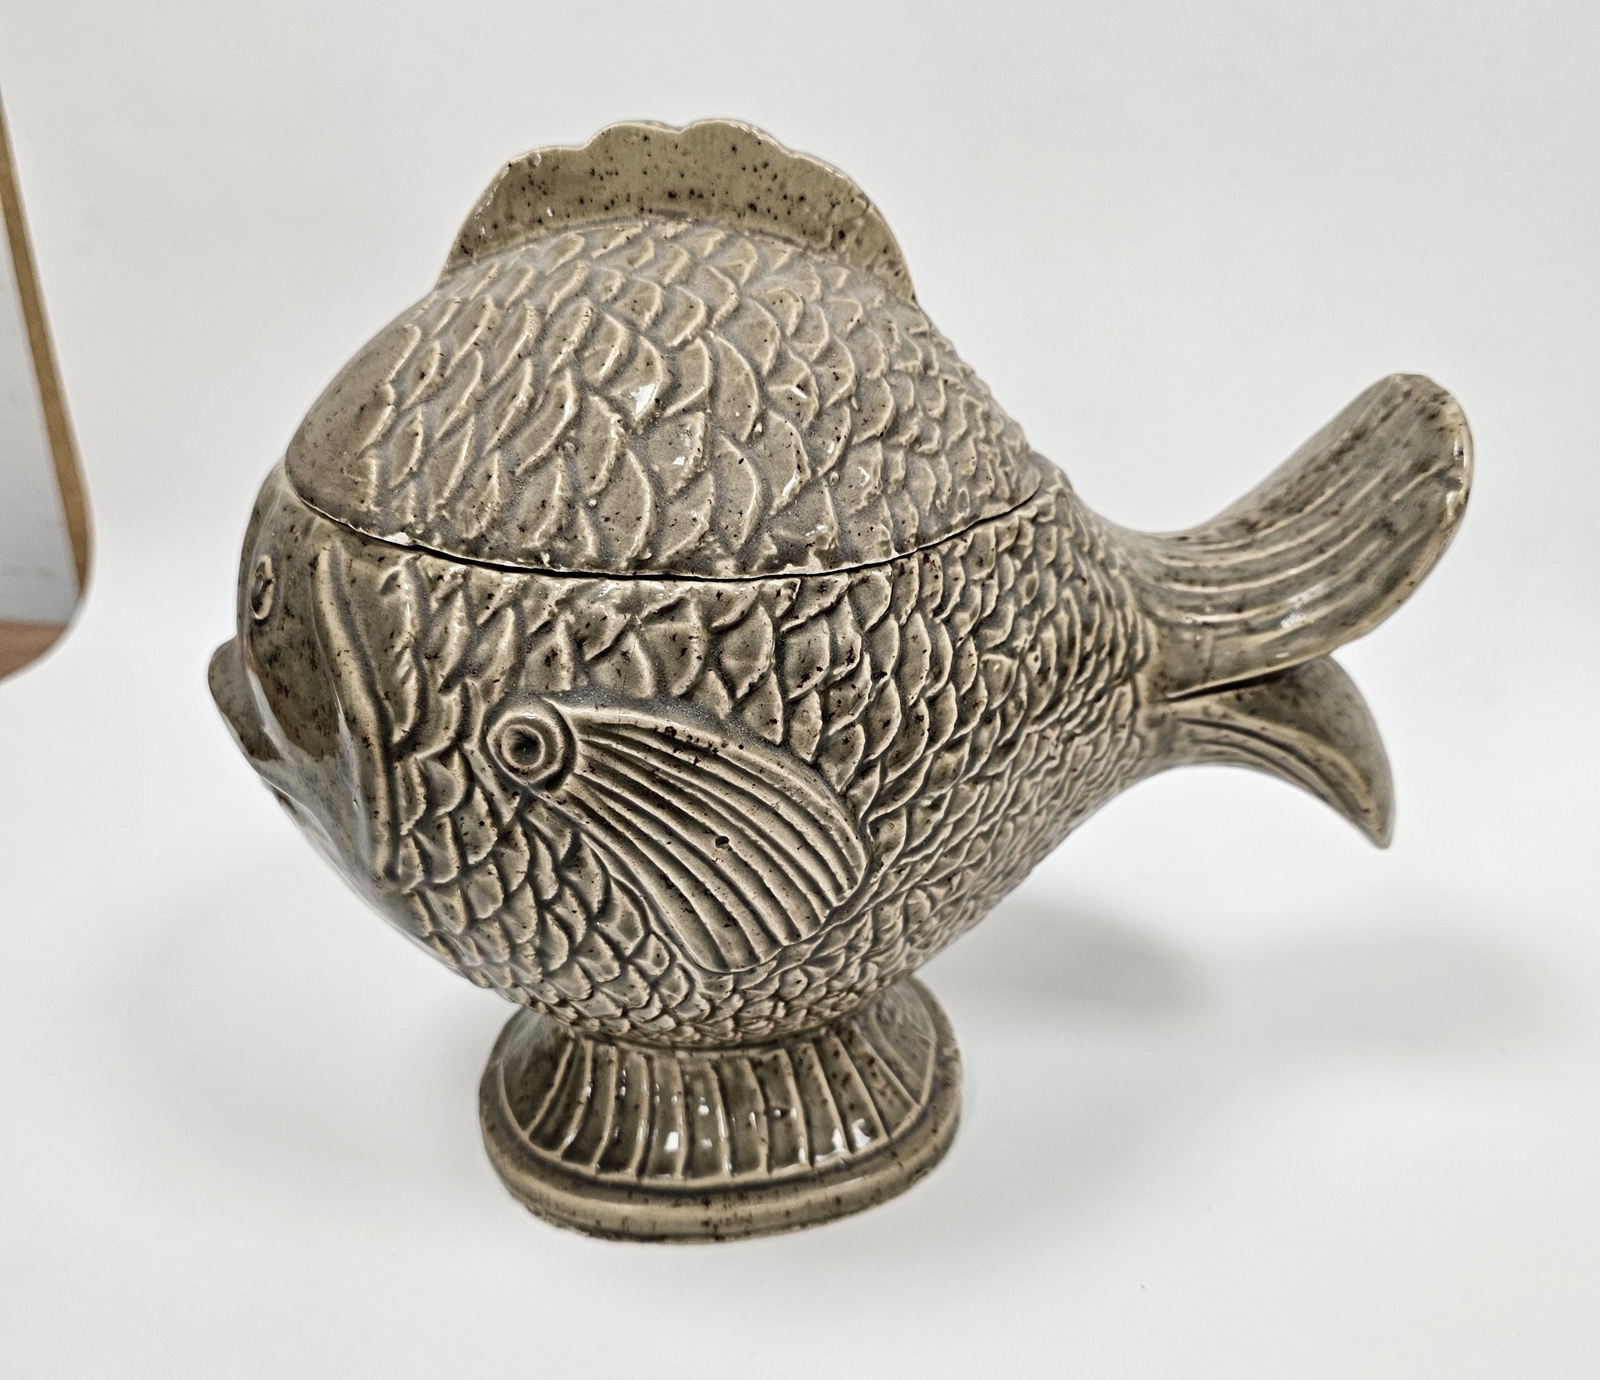 Poterie Maine Sars-Poteries fish tureen and cover, 20th century, scales and fins incised, enriched - Bild 3 aus 18